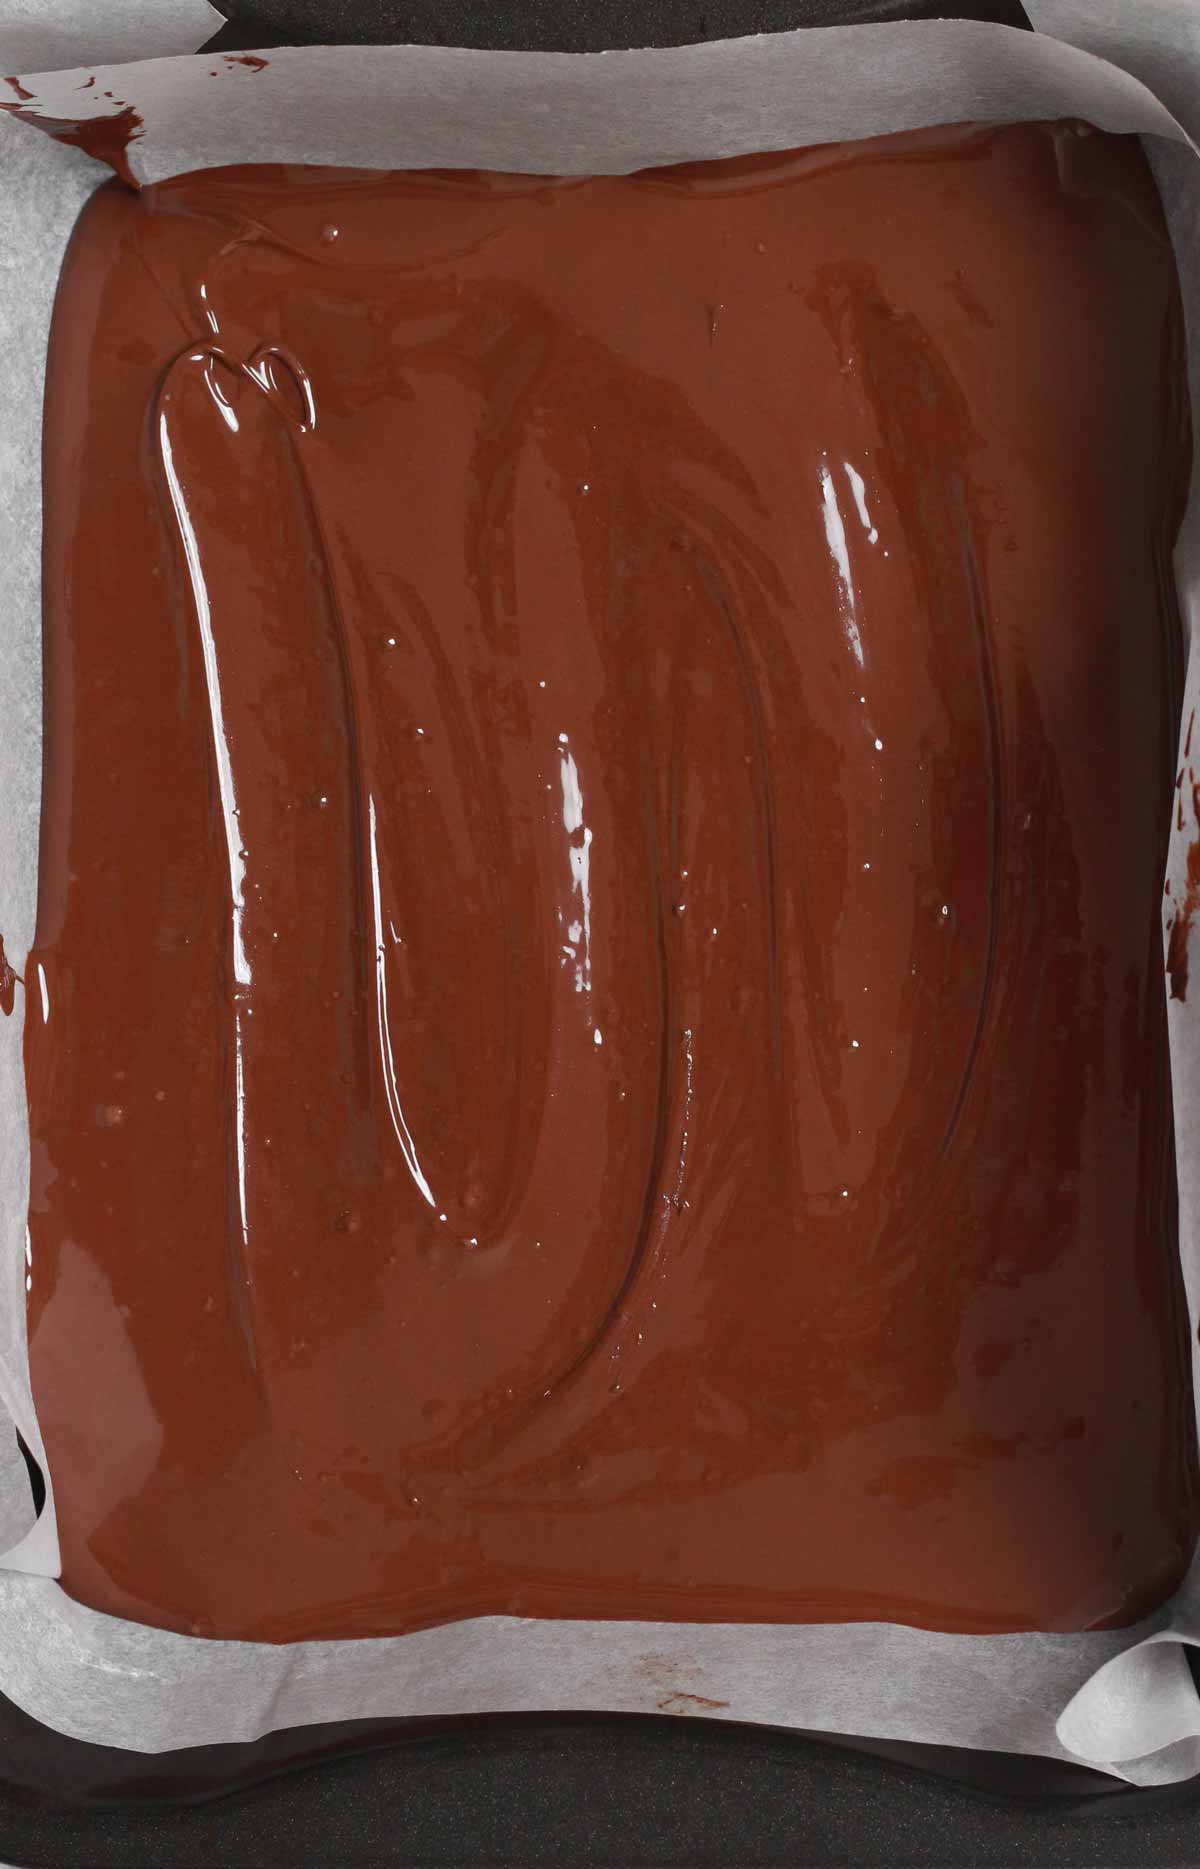 Melted Dark Chocolate In Lined Tin